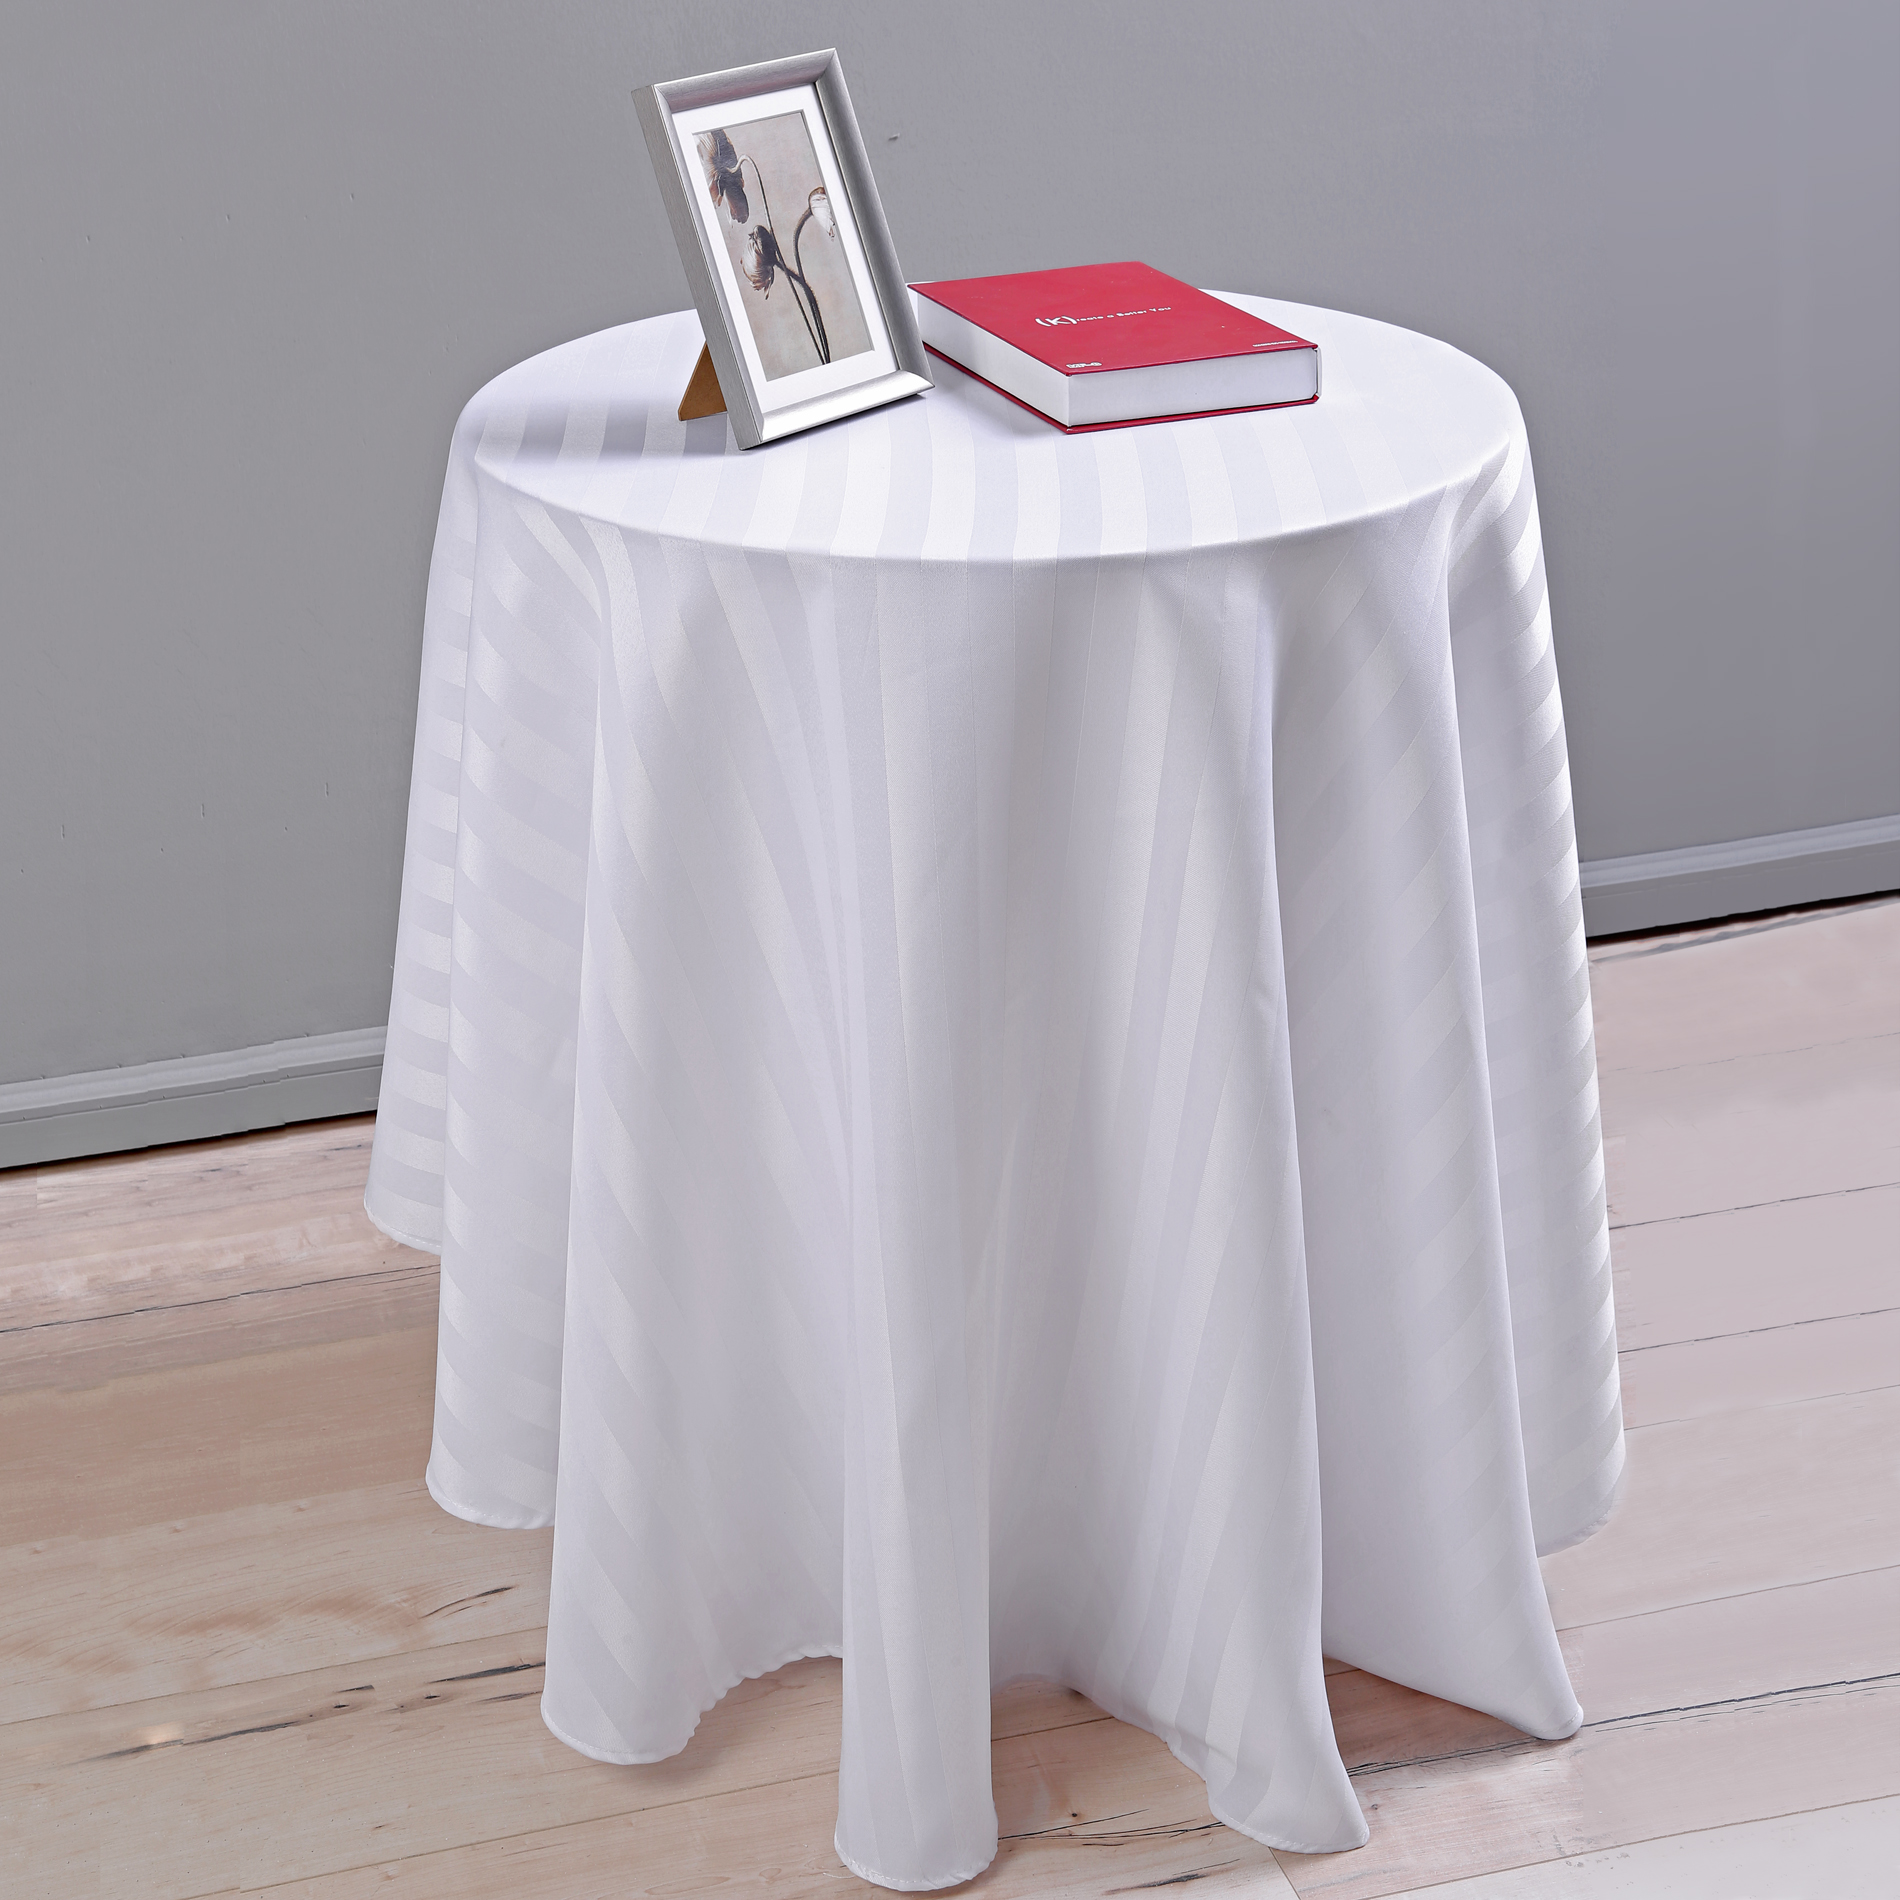 Essential Home Satin Striped Round Jacquard Tablecloth - White